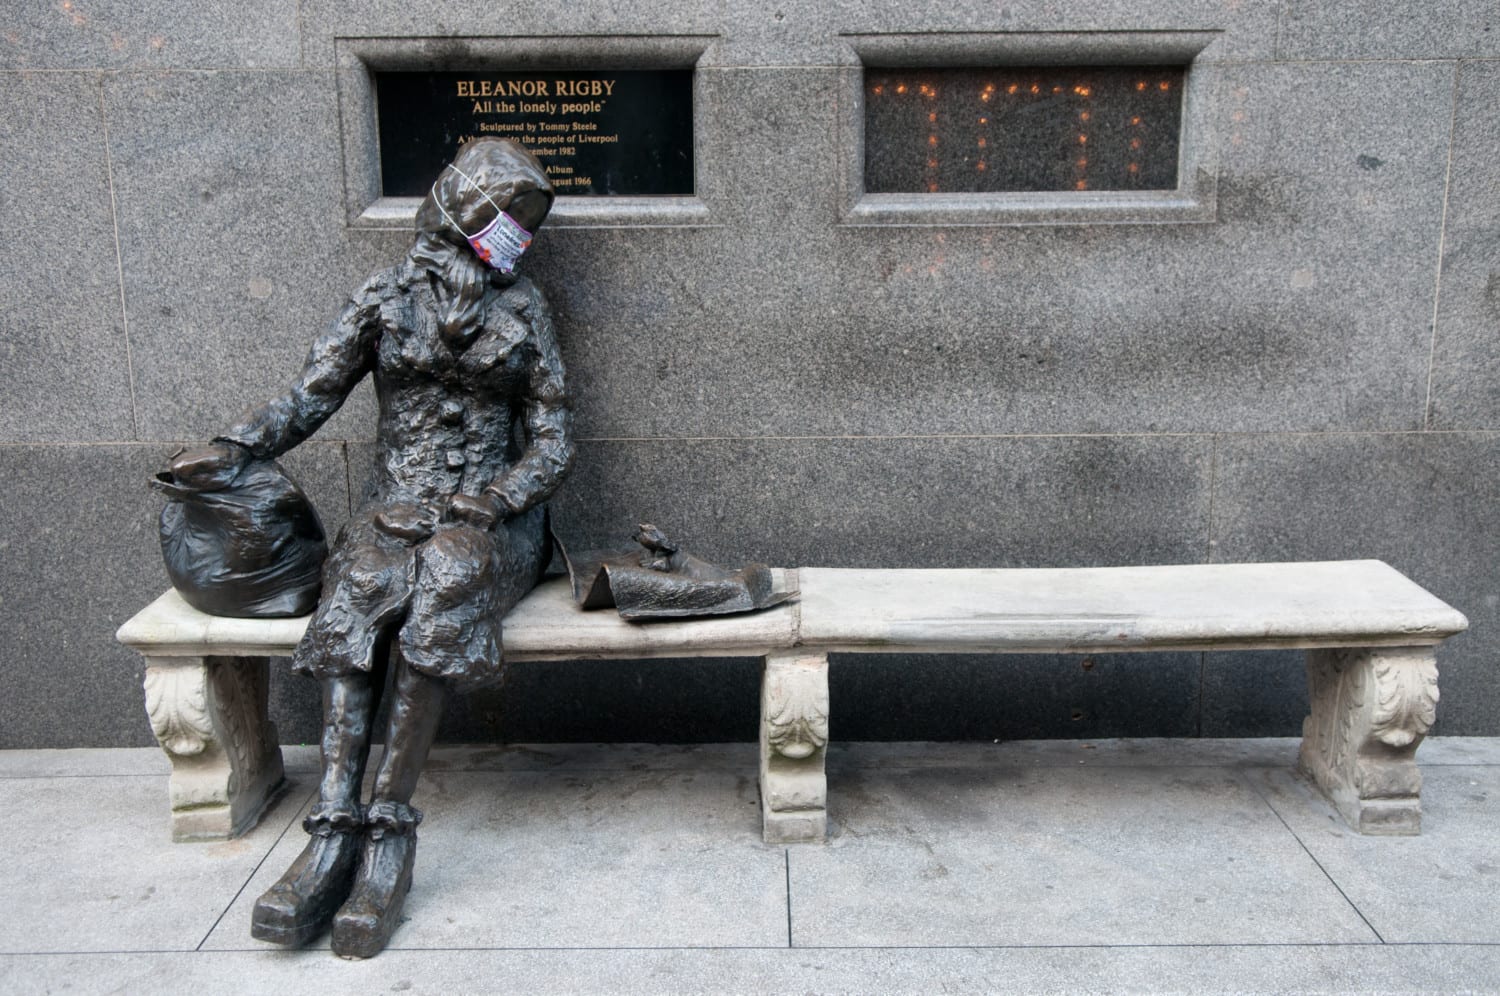 cross-stitched mask on Eleanor Rigby statue: provoking people to think about community, loneliness and society